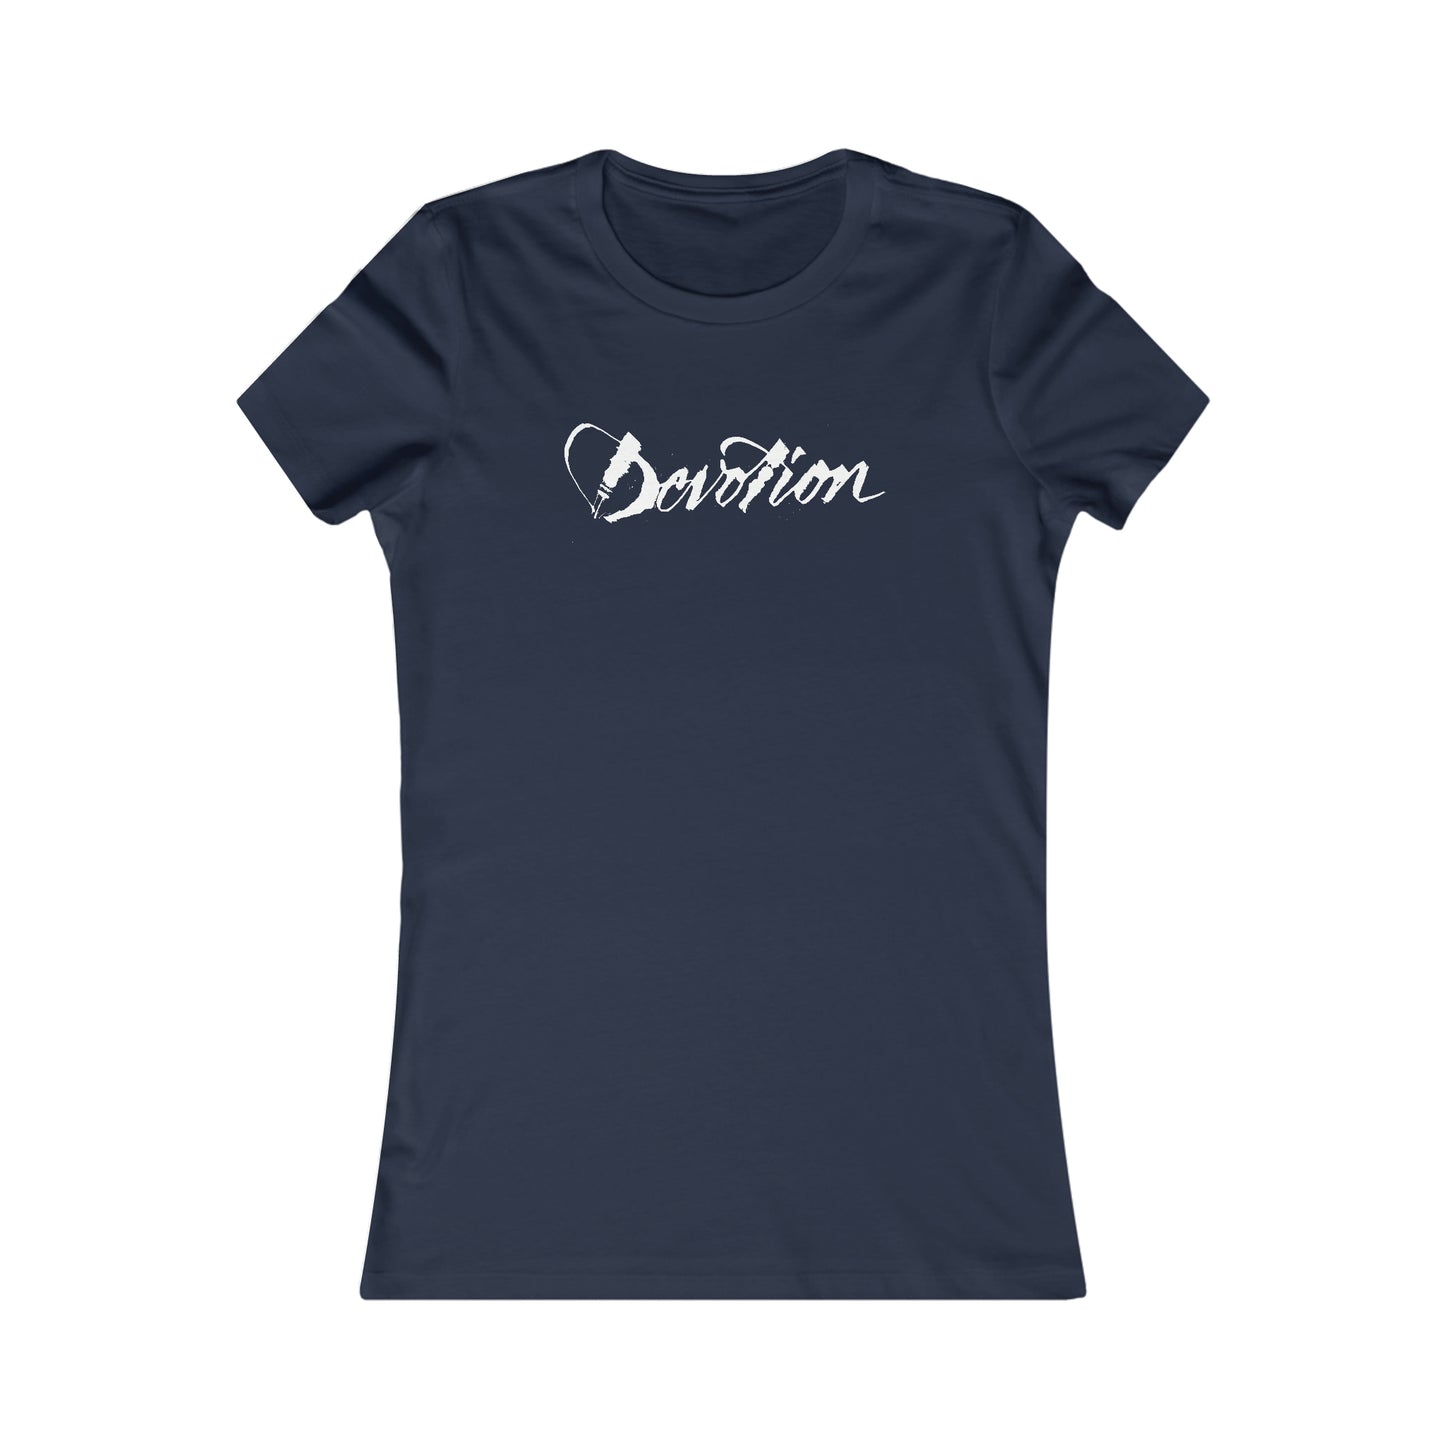 "Devotion" Mixed Messages Fitted T-Shirt